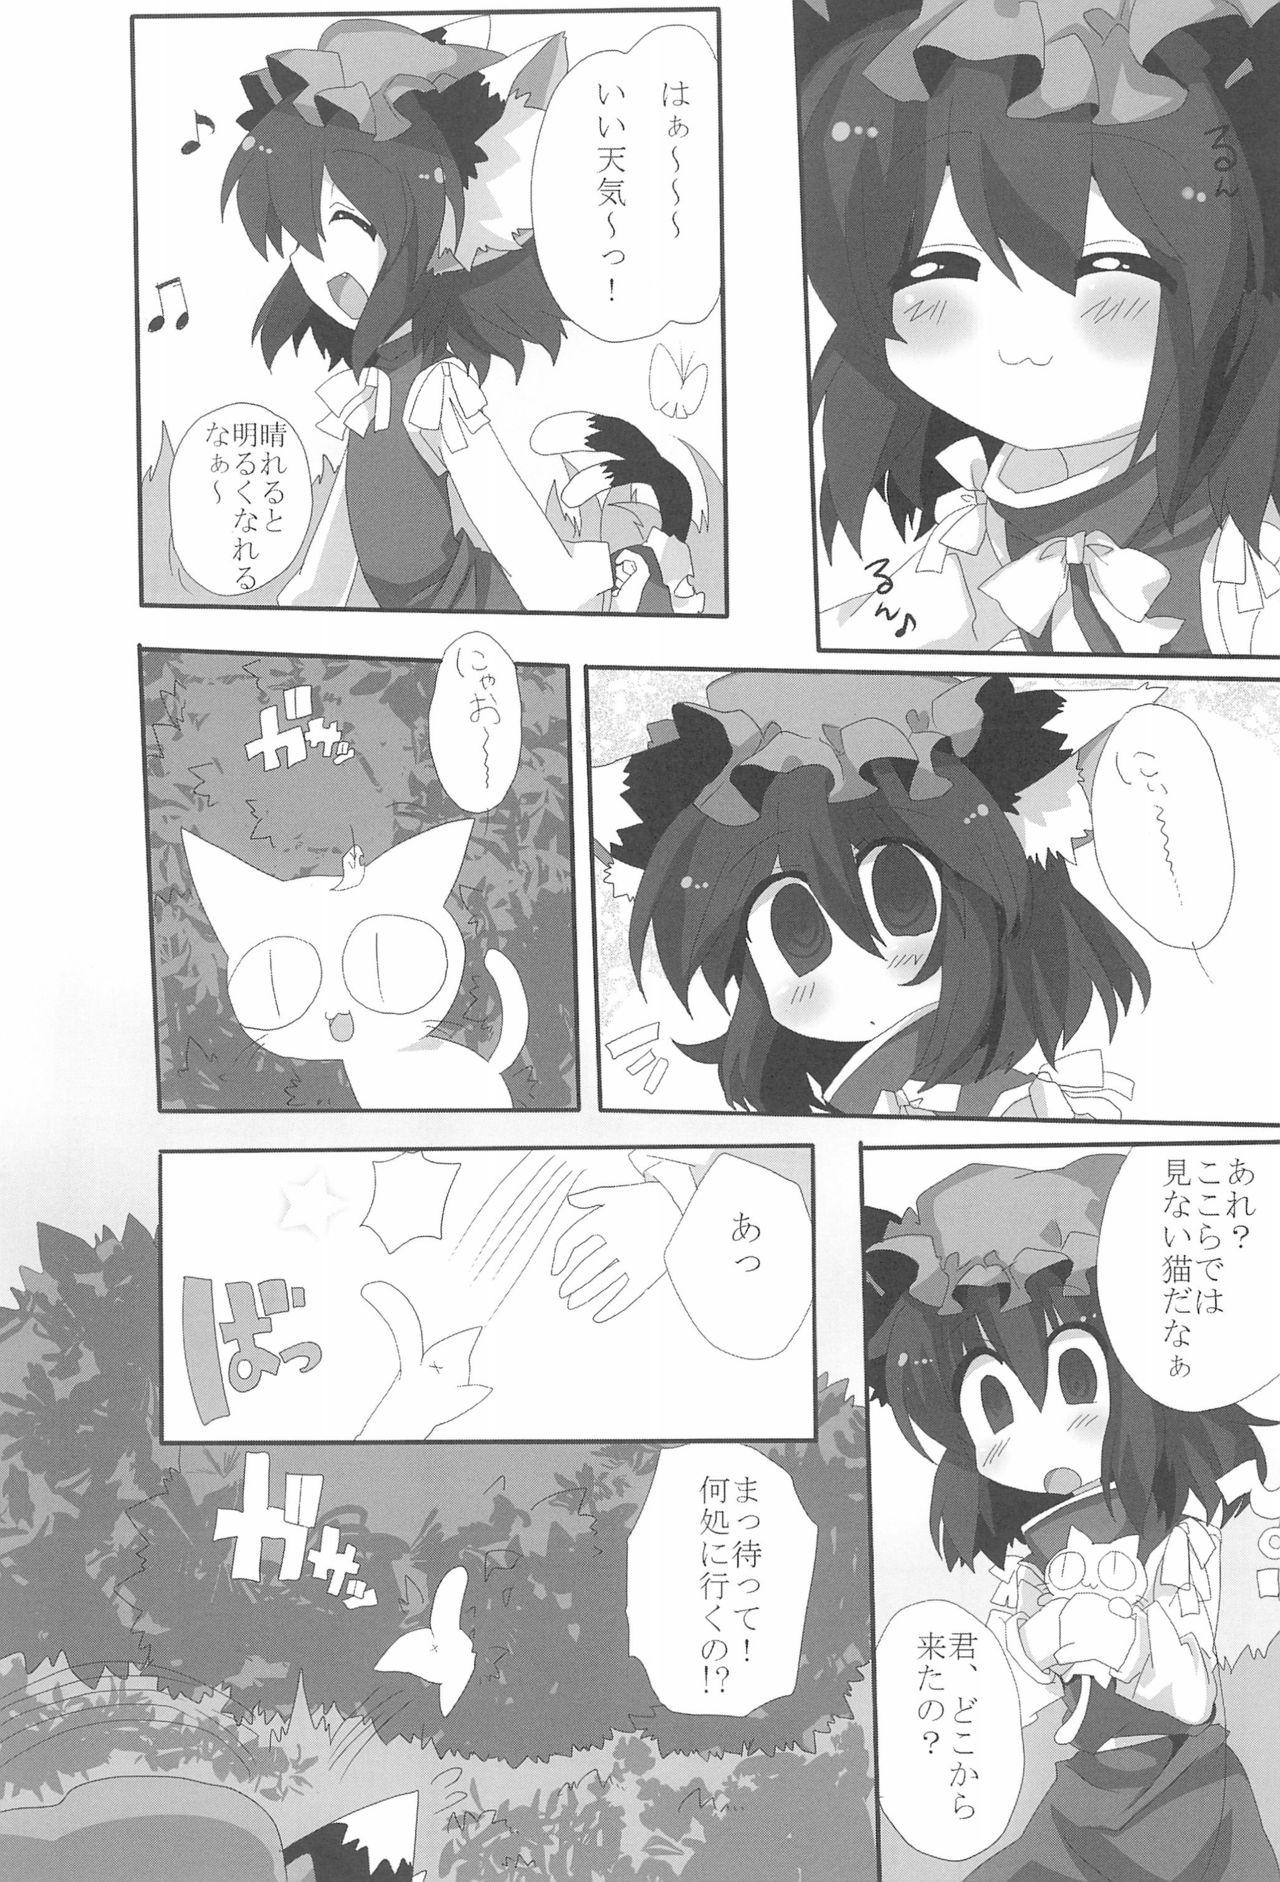 Thief NYAS! ATTRACTION - Touhou project Chichona - Page 5